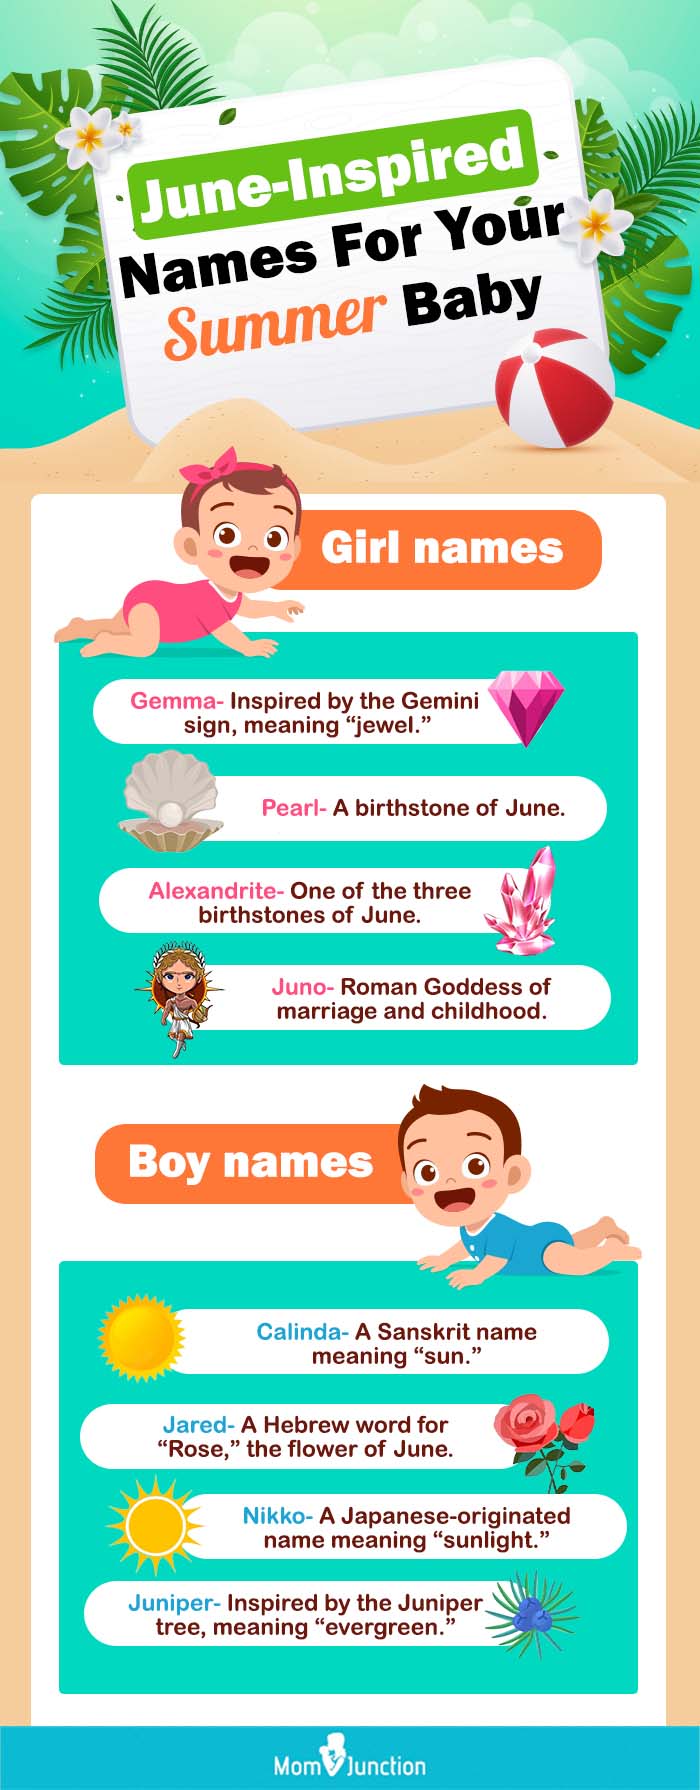 june inspired names for your summer baby (infographic)